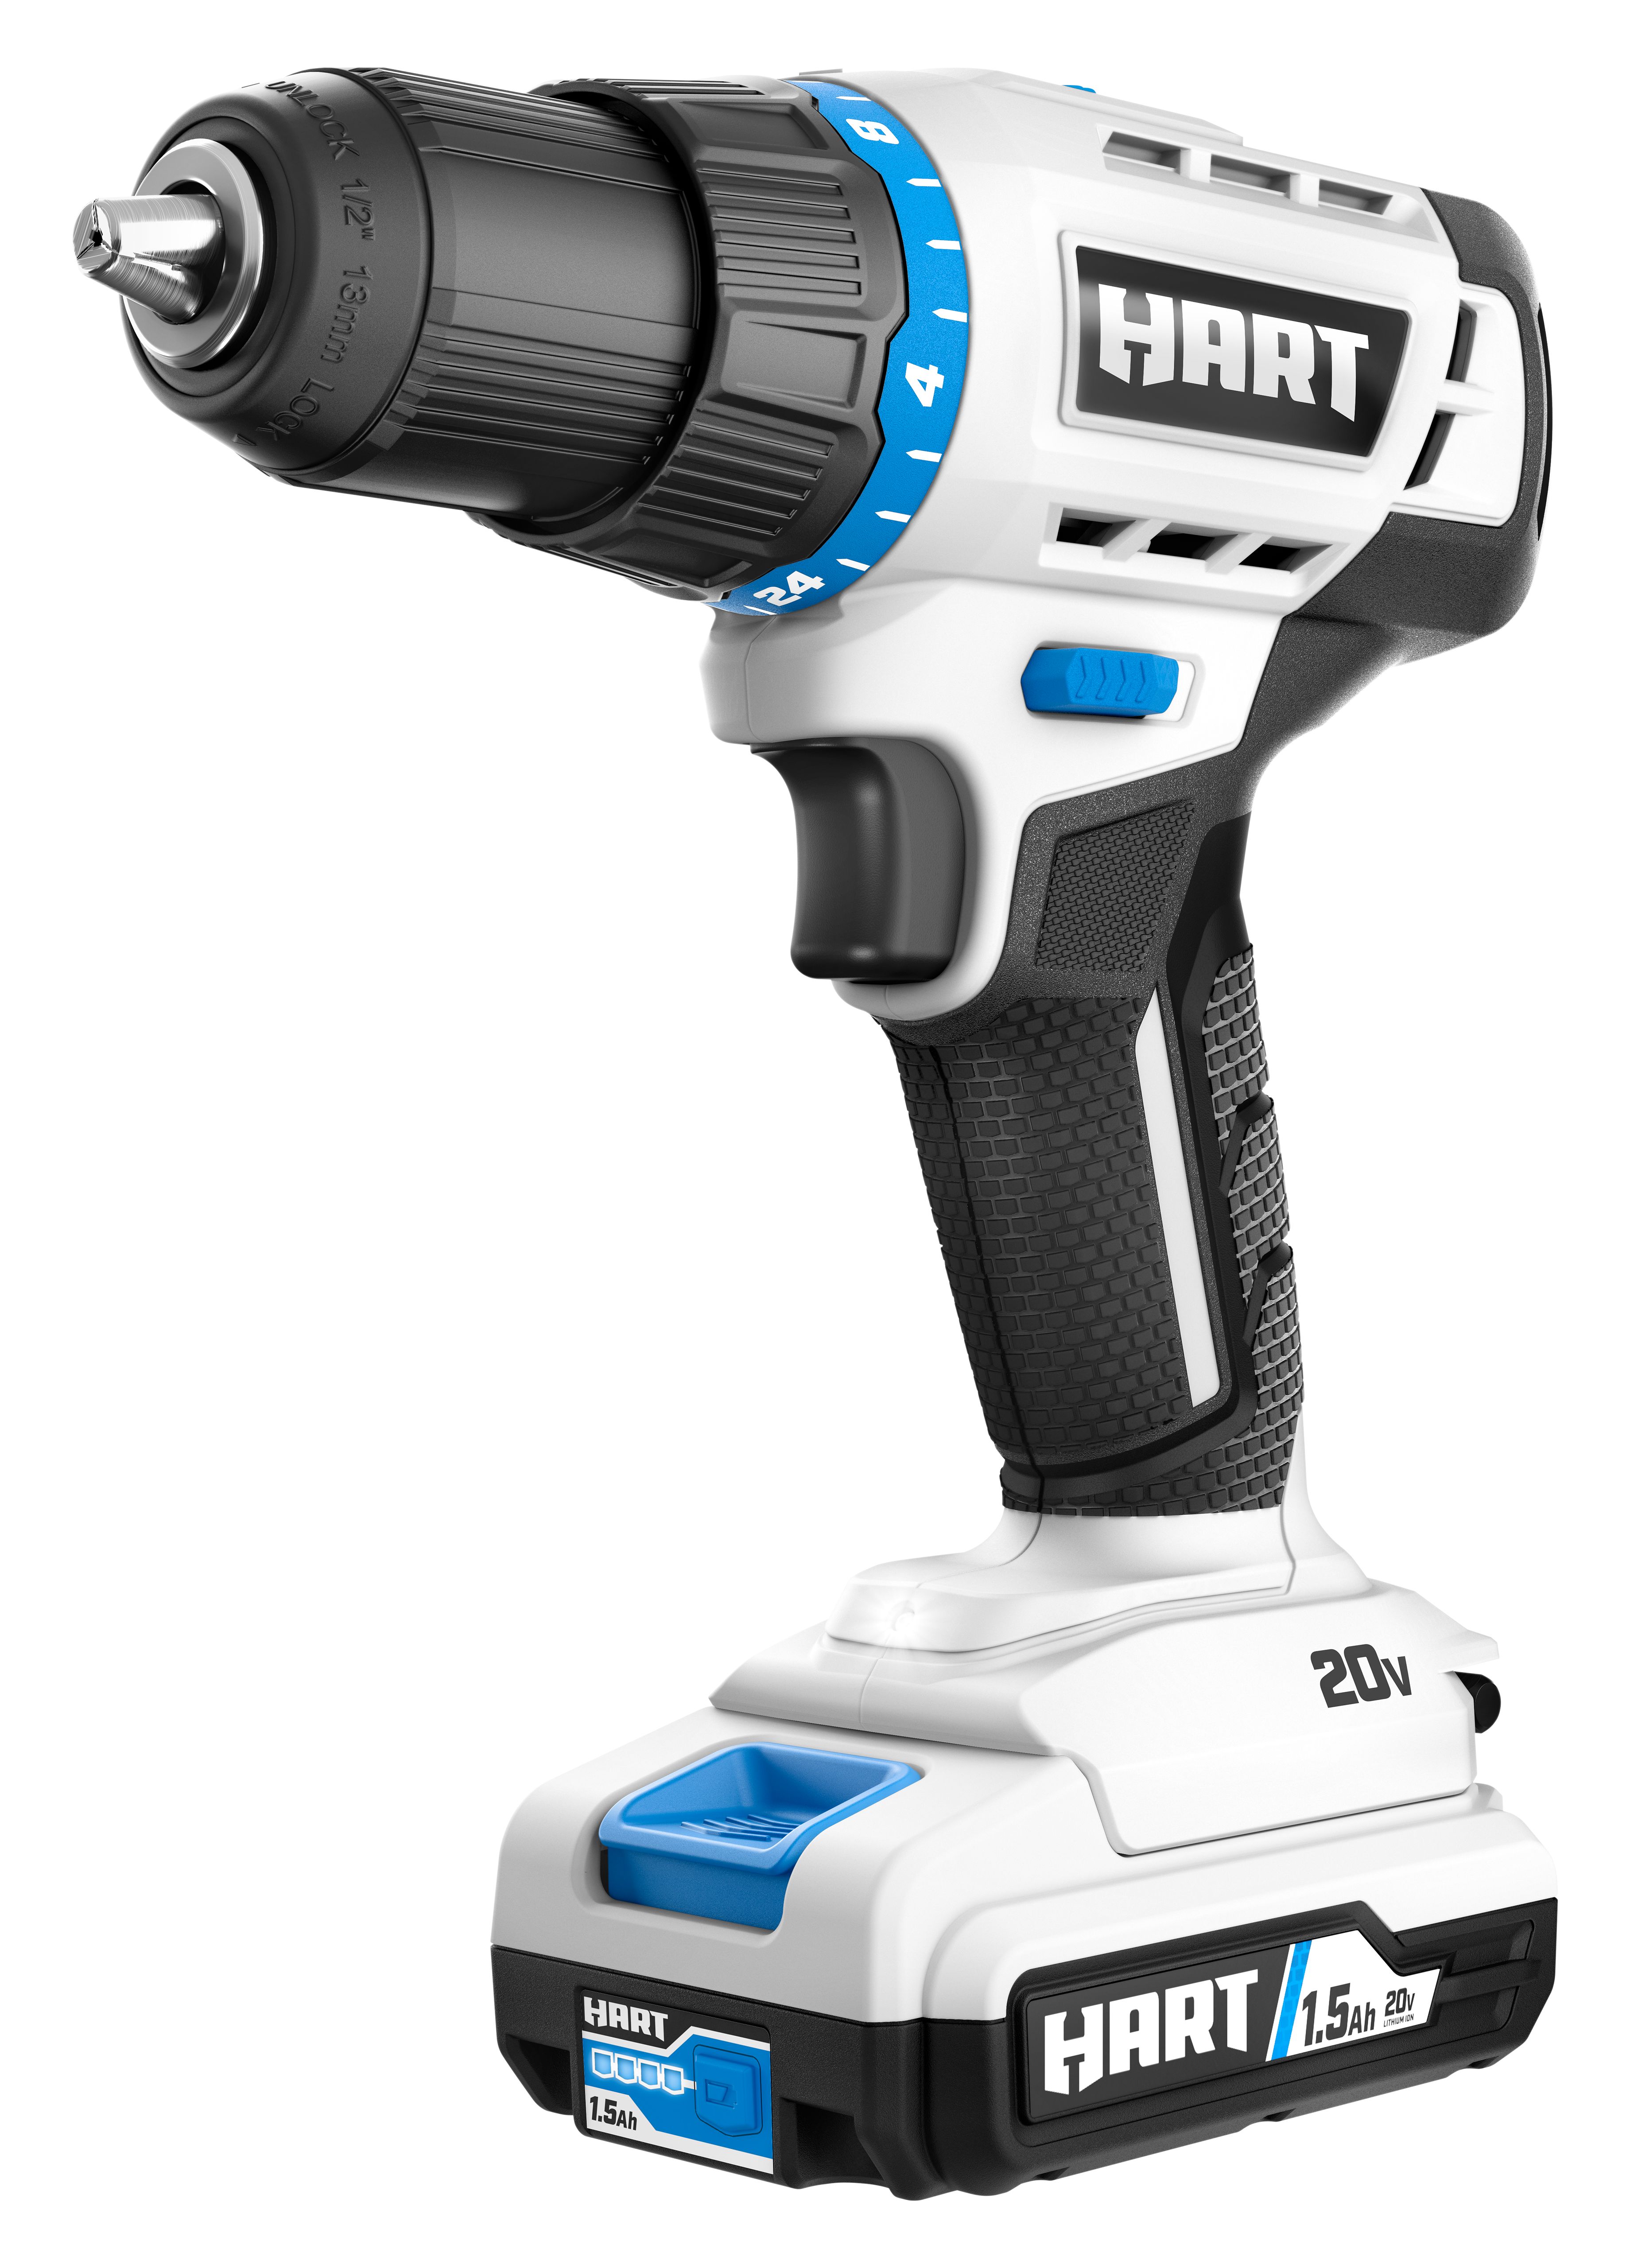 HART 20-Volt 1/2-inch Cordless Drill/Driver Kit, (1) 1.5Ah Lithium-Ion Battery, Gen 2 - image 1 of 15